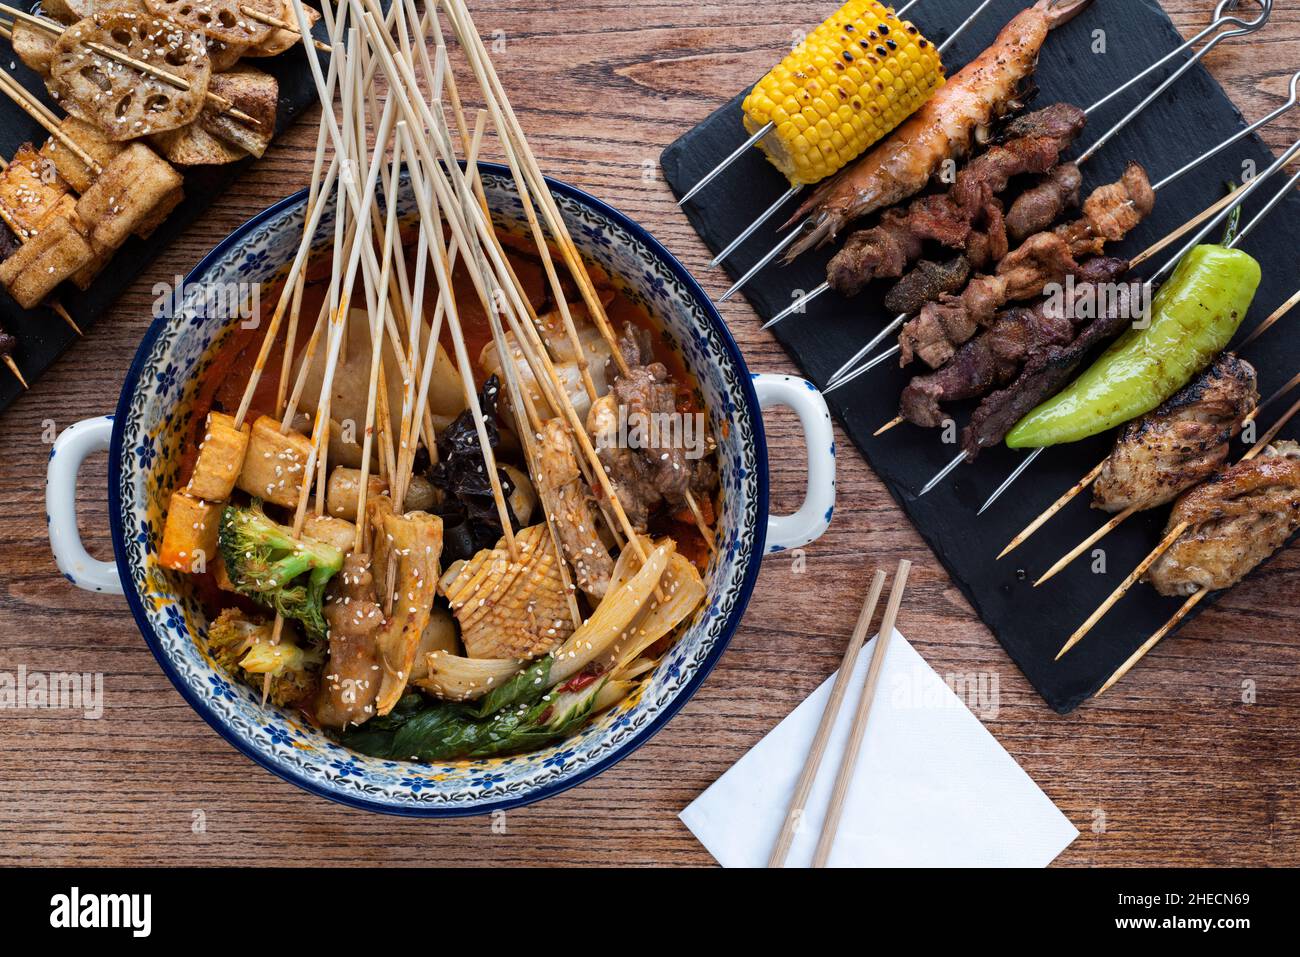 Sheffield UK - 9 May 2018 :Delicious Asian food from Saha Skewer Stock Photo